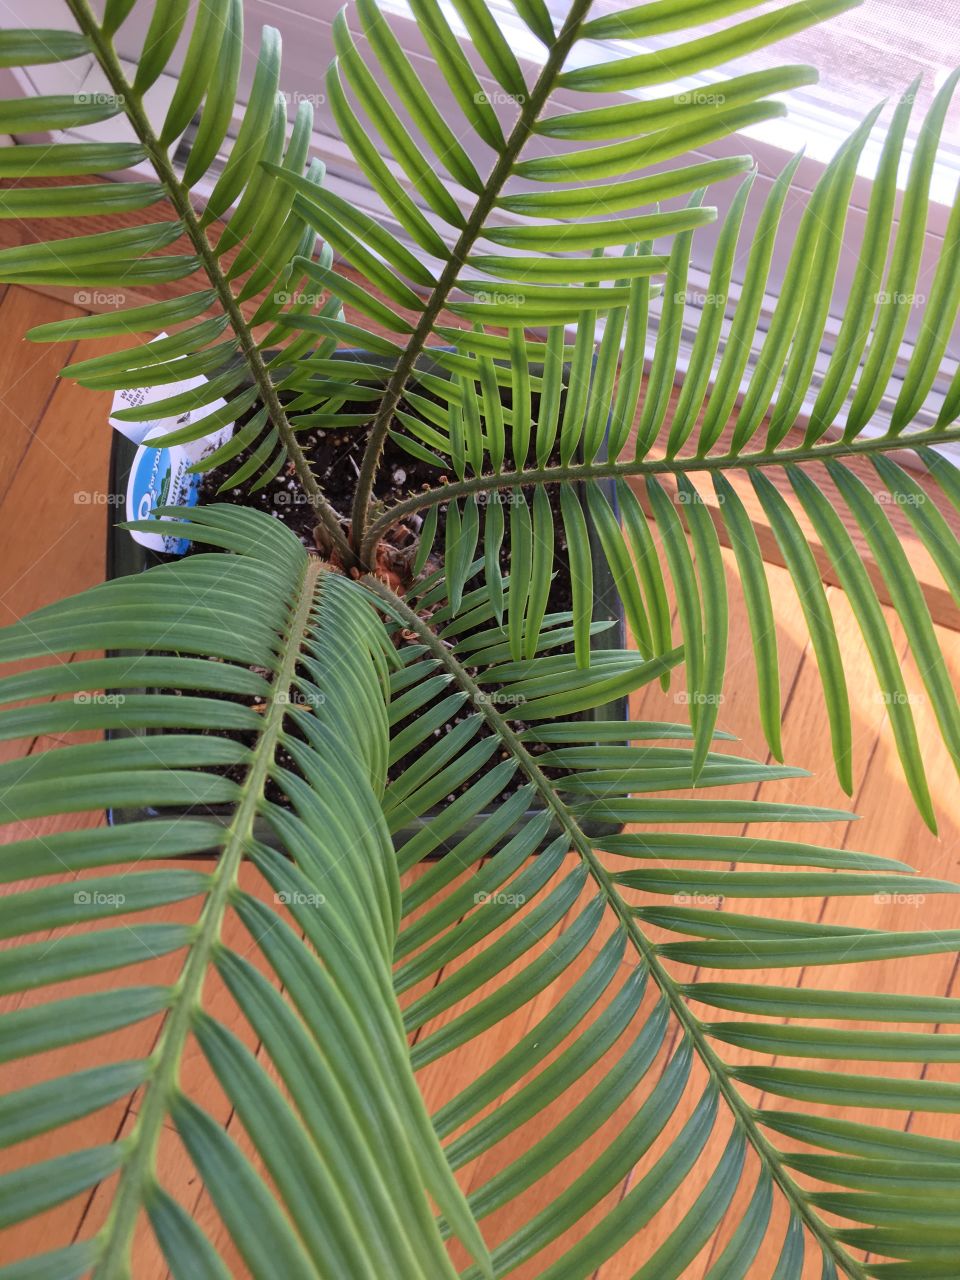 sago palm growing crazy inside when it is -25 outside in canada 